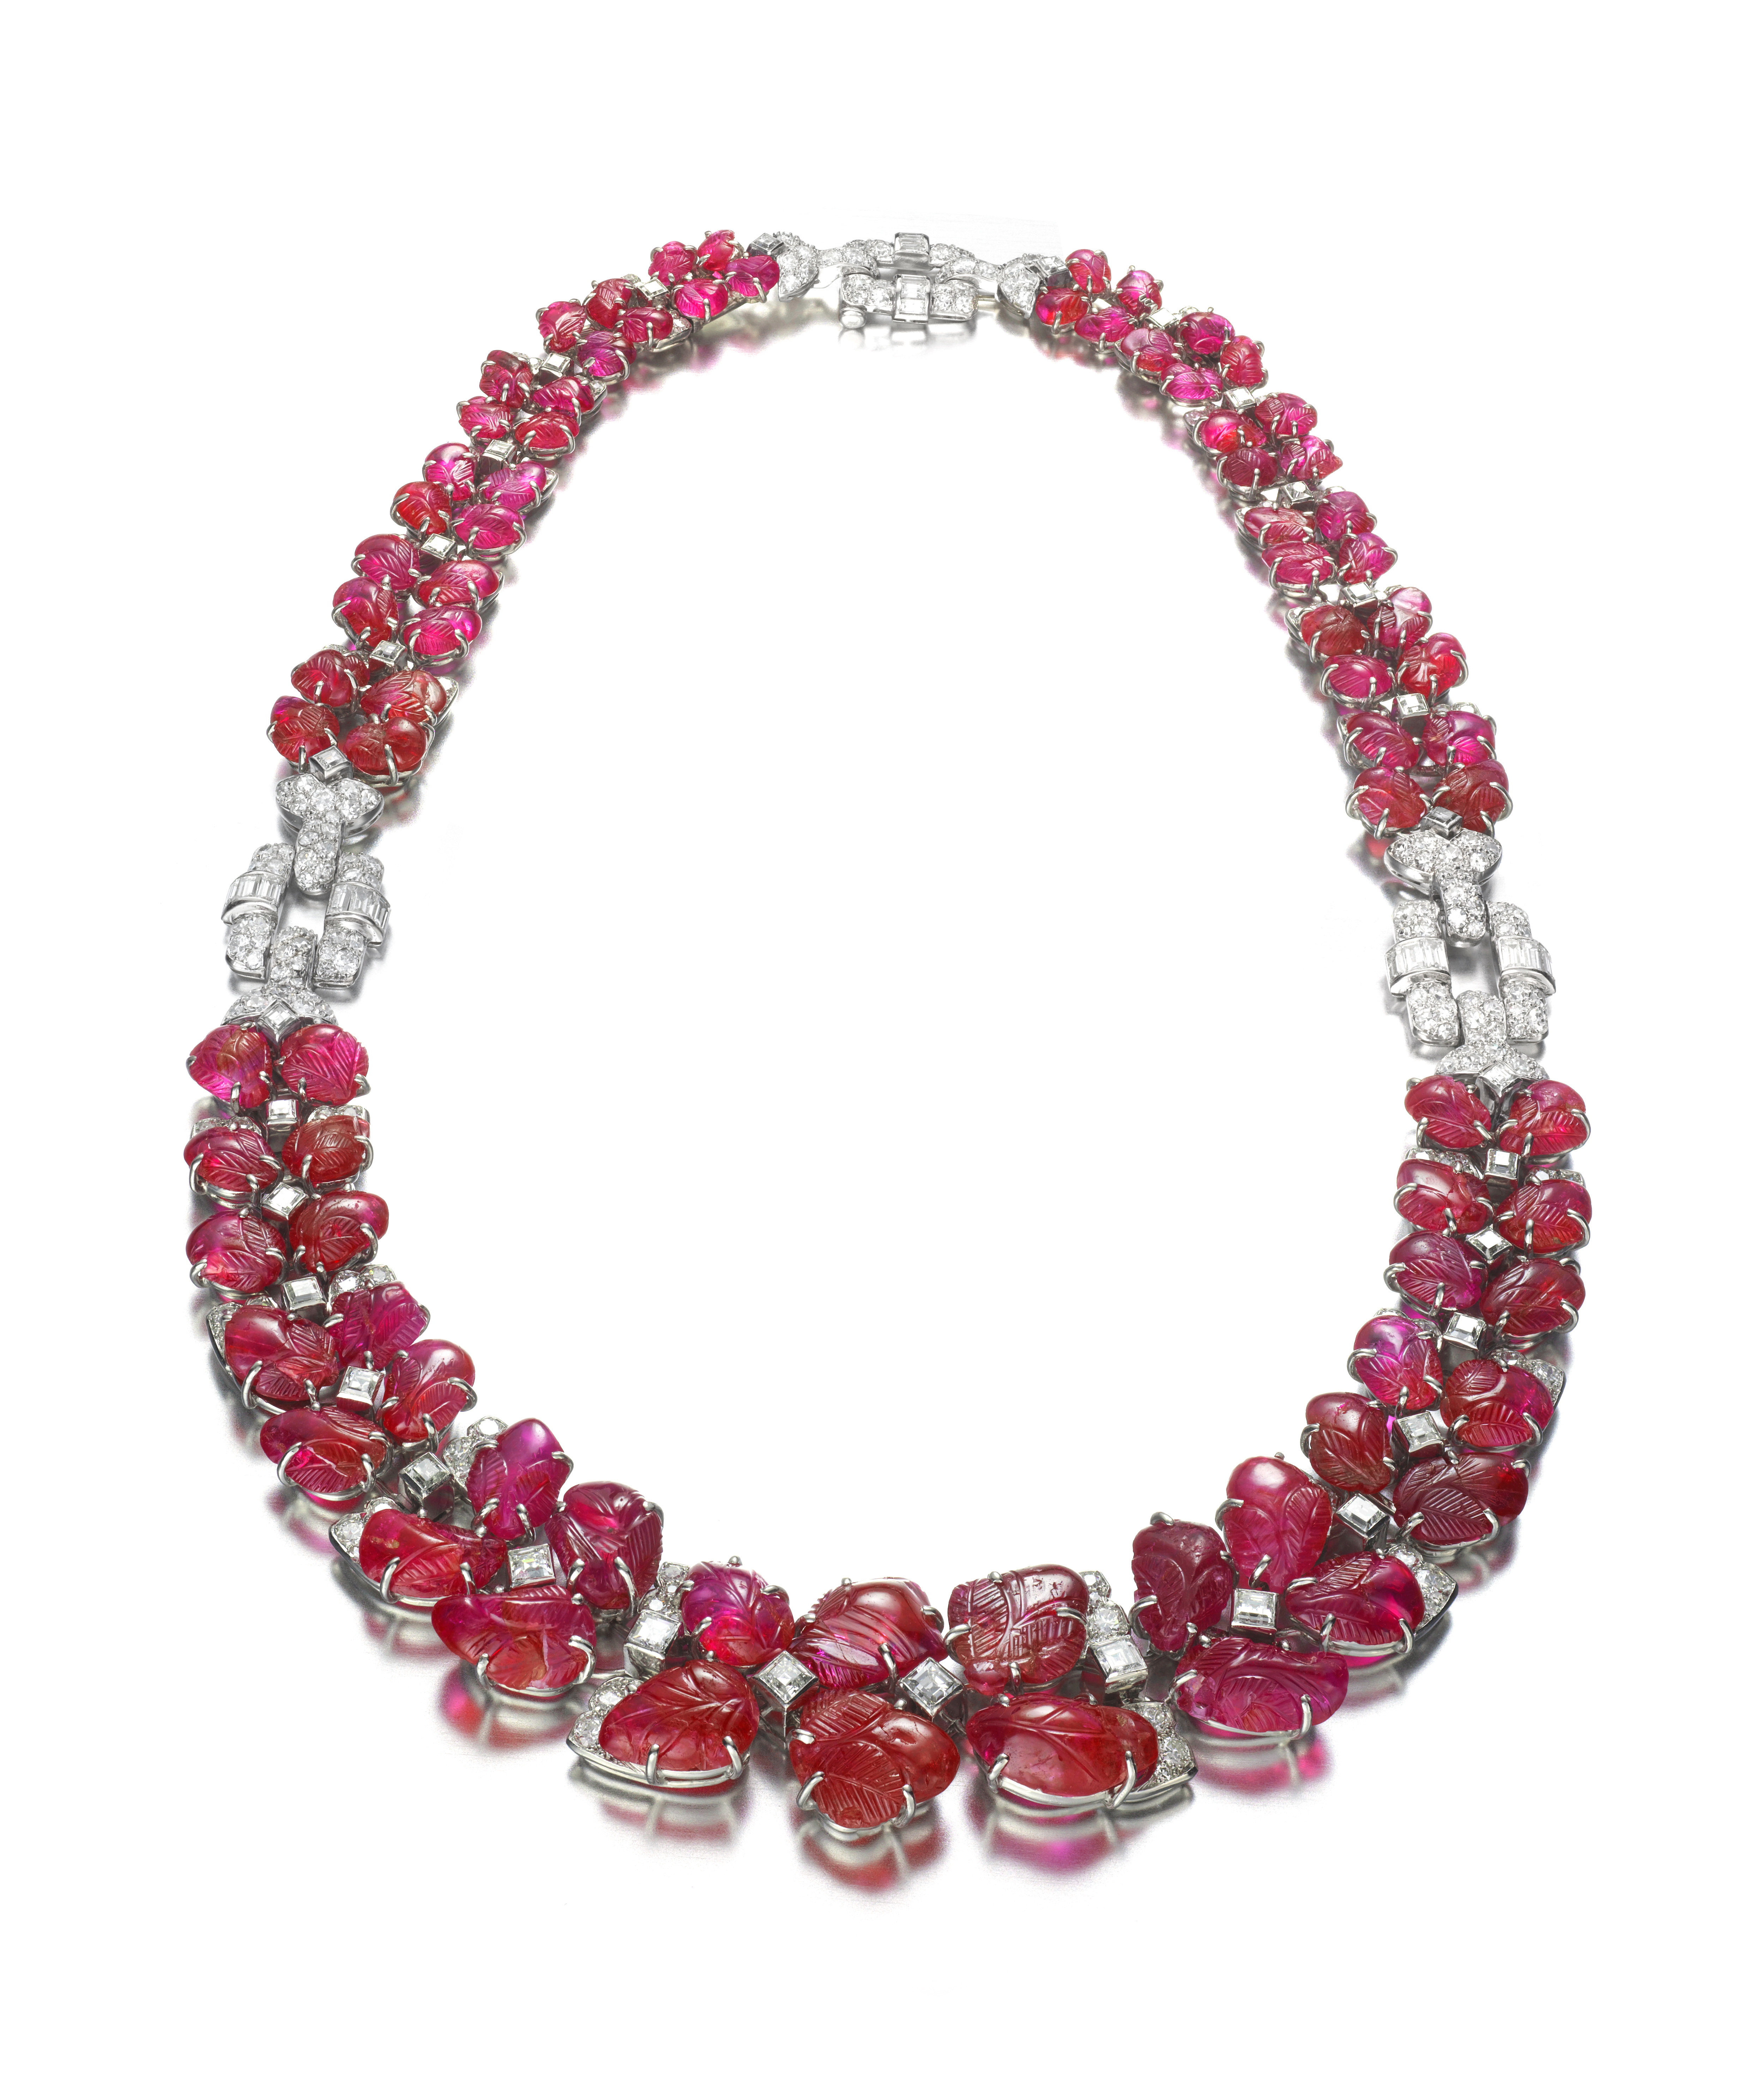 Necklace from the Adrien Labi Collection